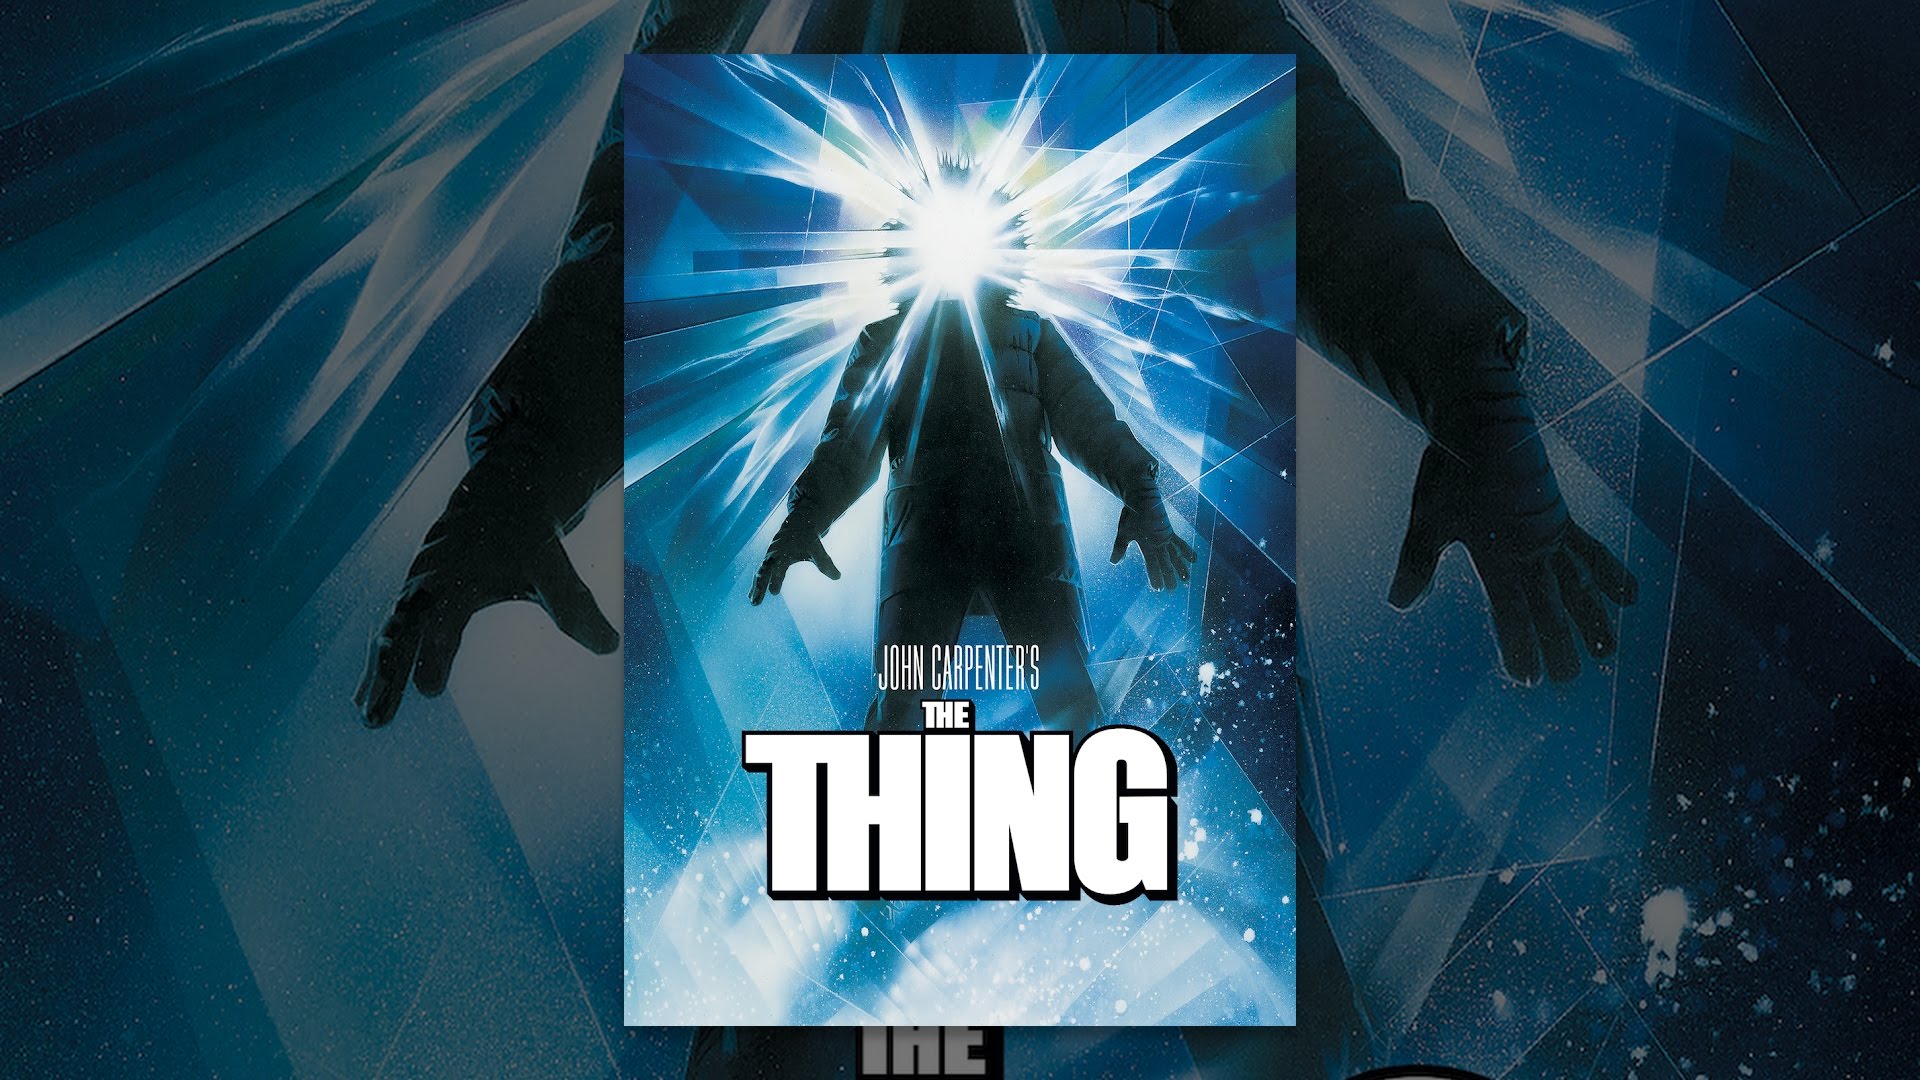 The Thing (1982)  Death by Defibrillation in 4K HDR 